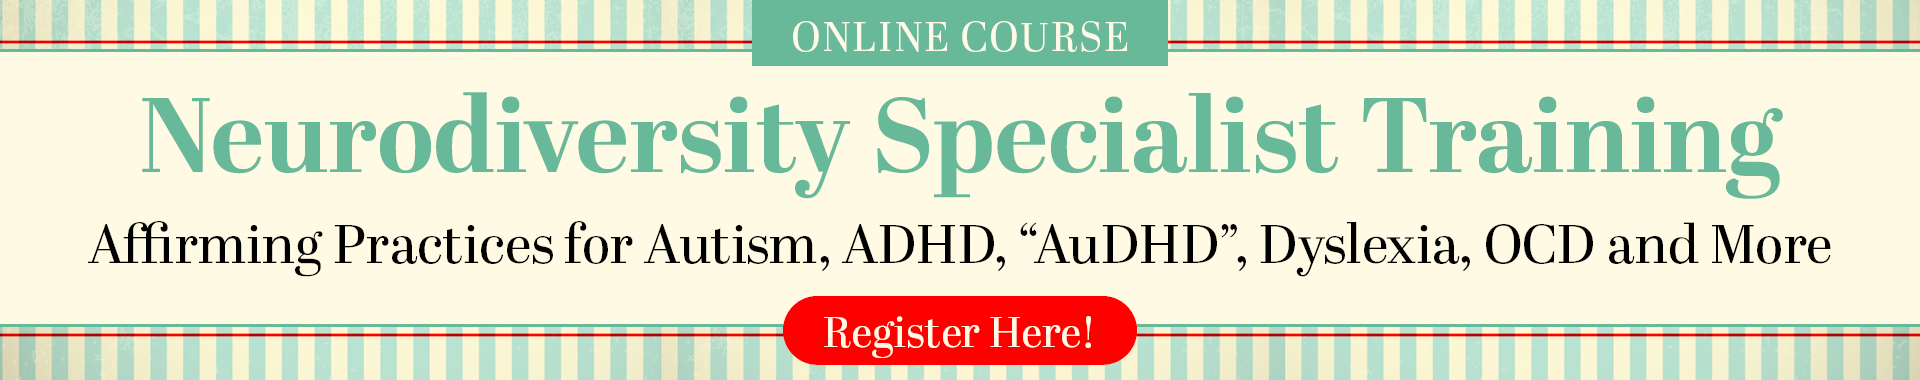 Neurodiversity Specialist Training: Affirming Practices for Autism, ADHD, “AuDHD”, Dyslexia, OCD, and More